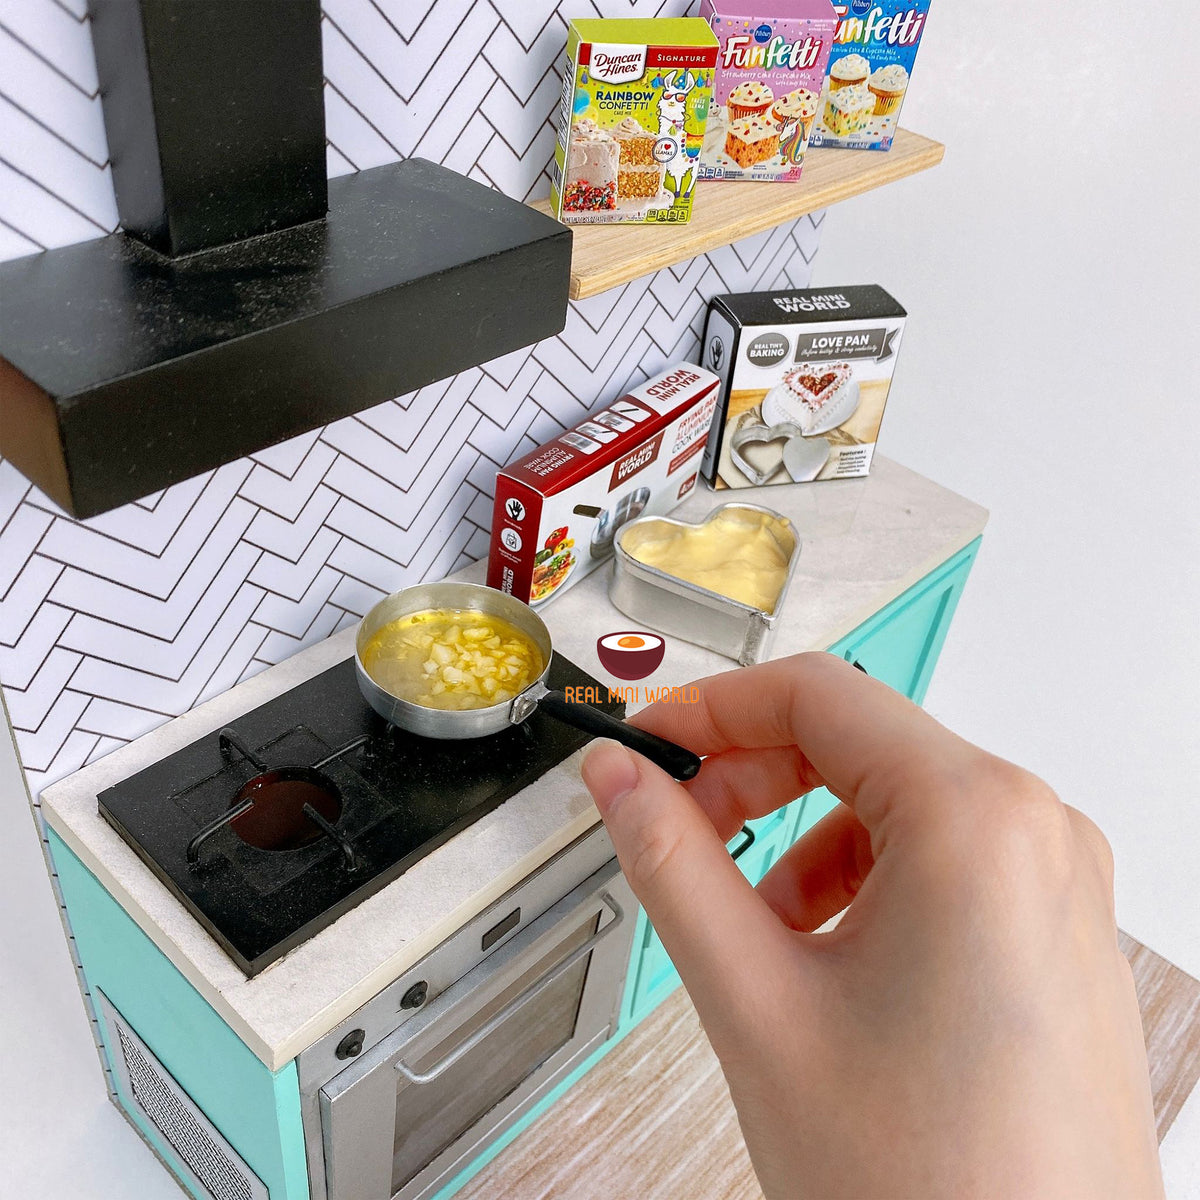 Red Miniature Kitchen REAL FOOD Cooking Tiny Cooking Set Mini Stove Working Miniature  Kitchen With Accessories 